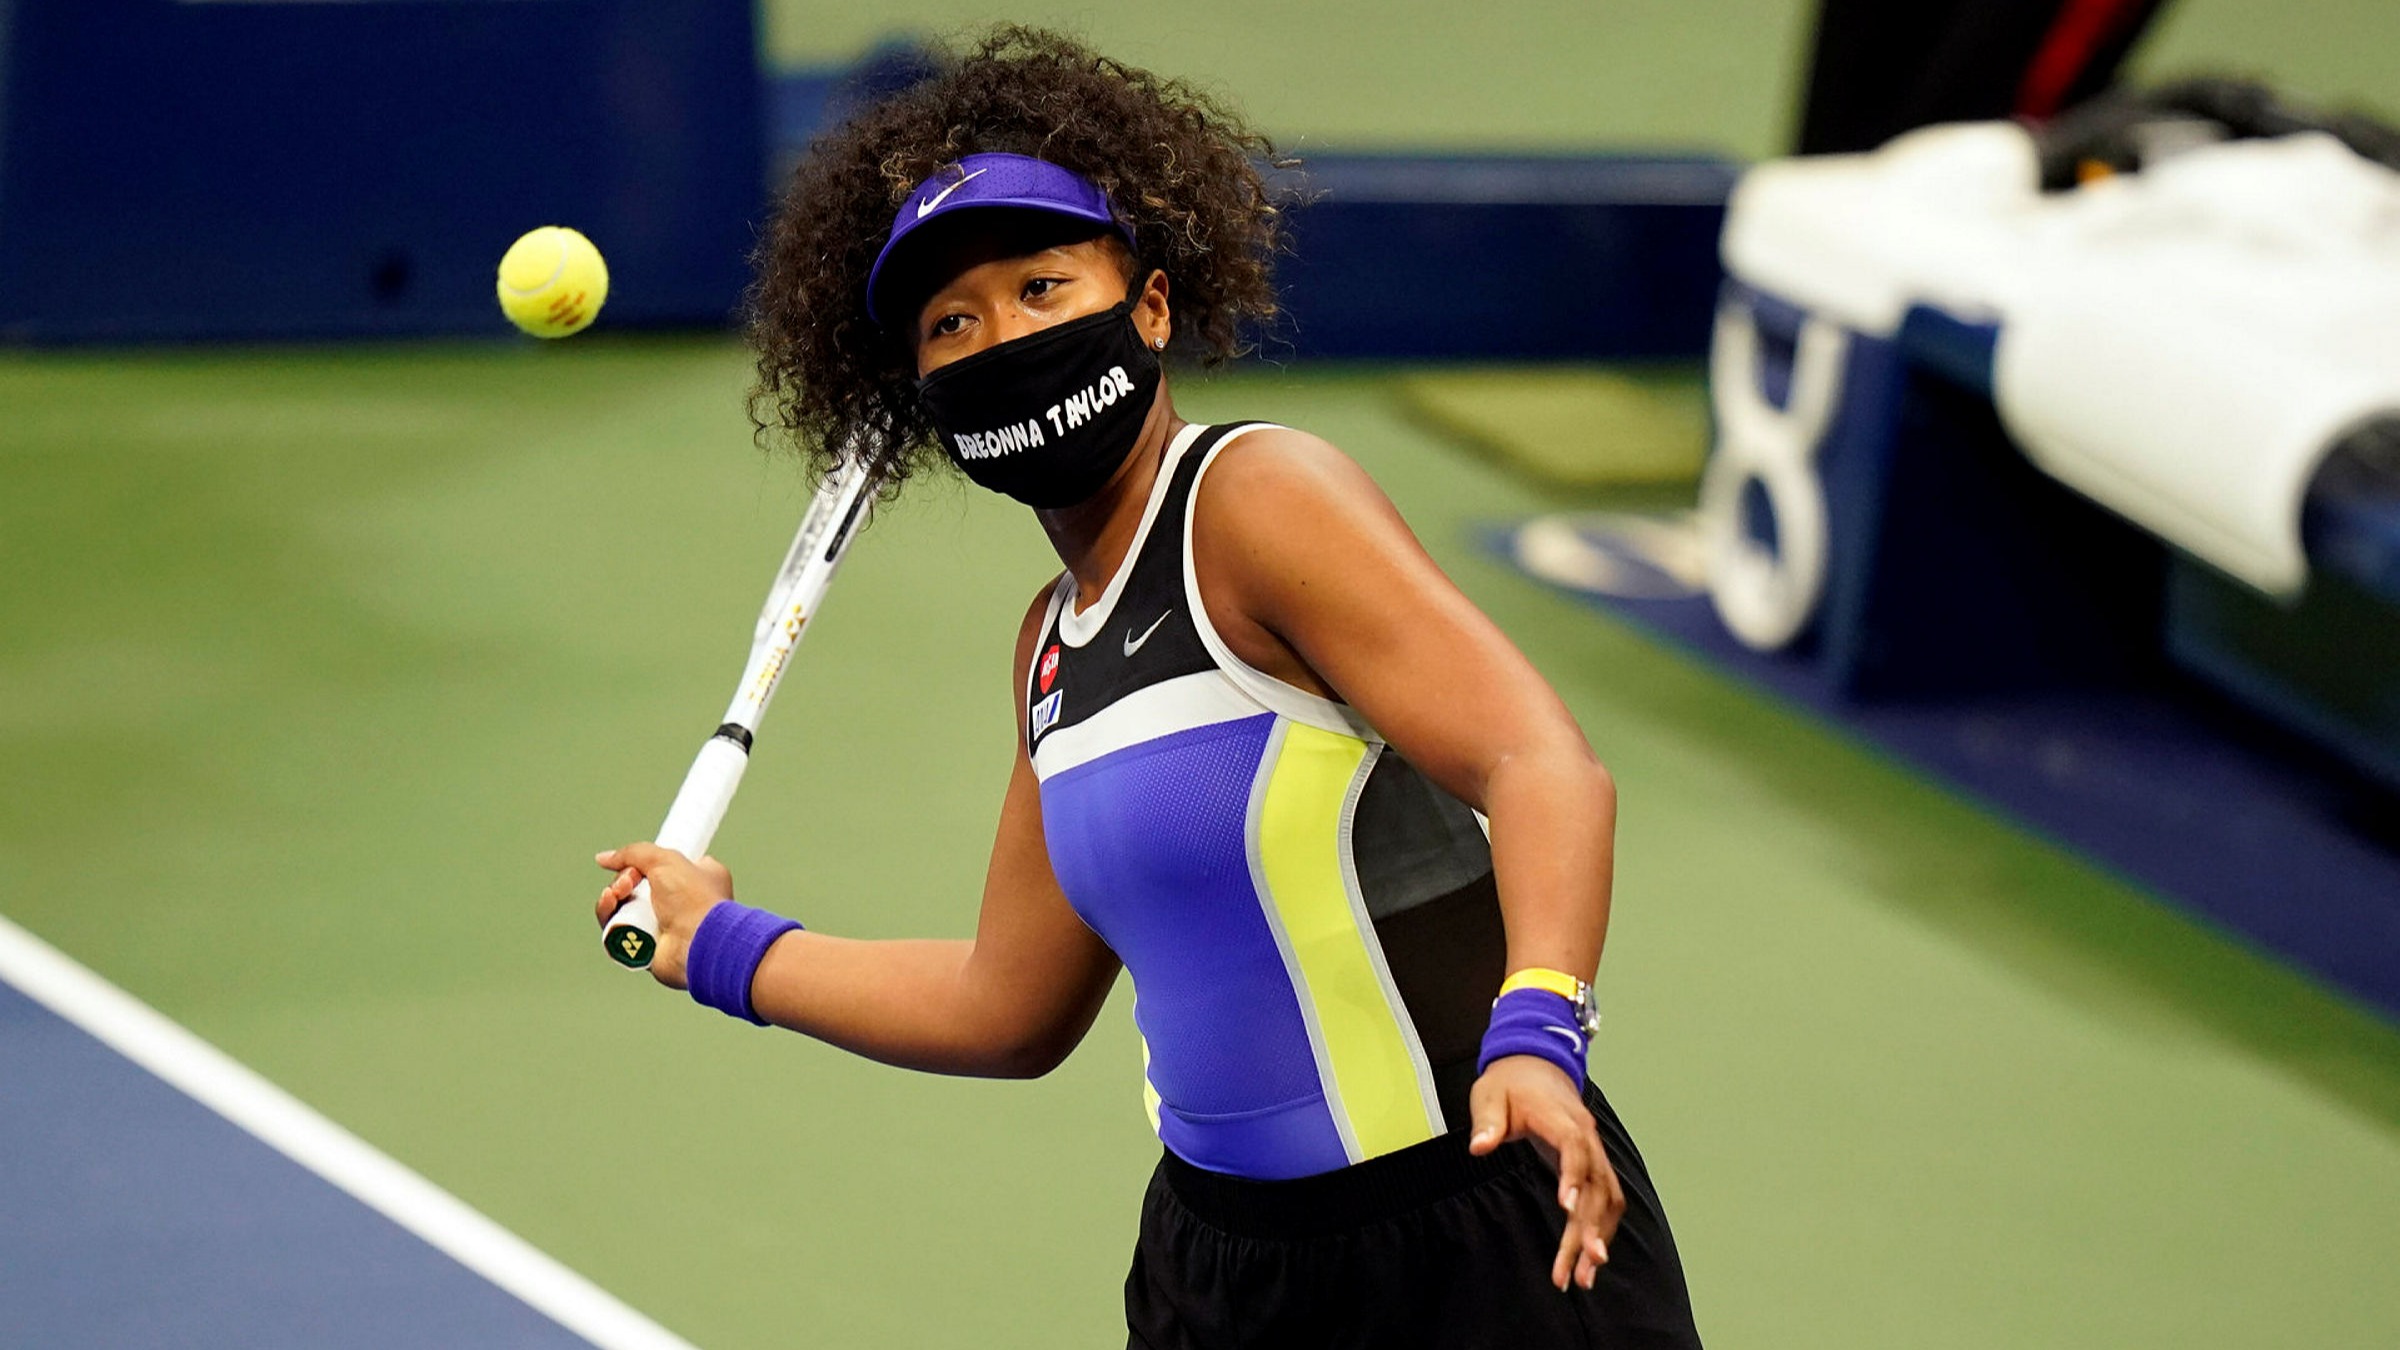 Trottoir Jood Mannelijkheid Sport and politics: Naomi Osaka and the value of stars speaking out |  Financial Times